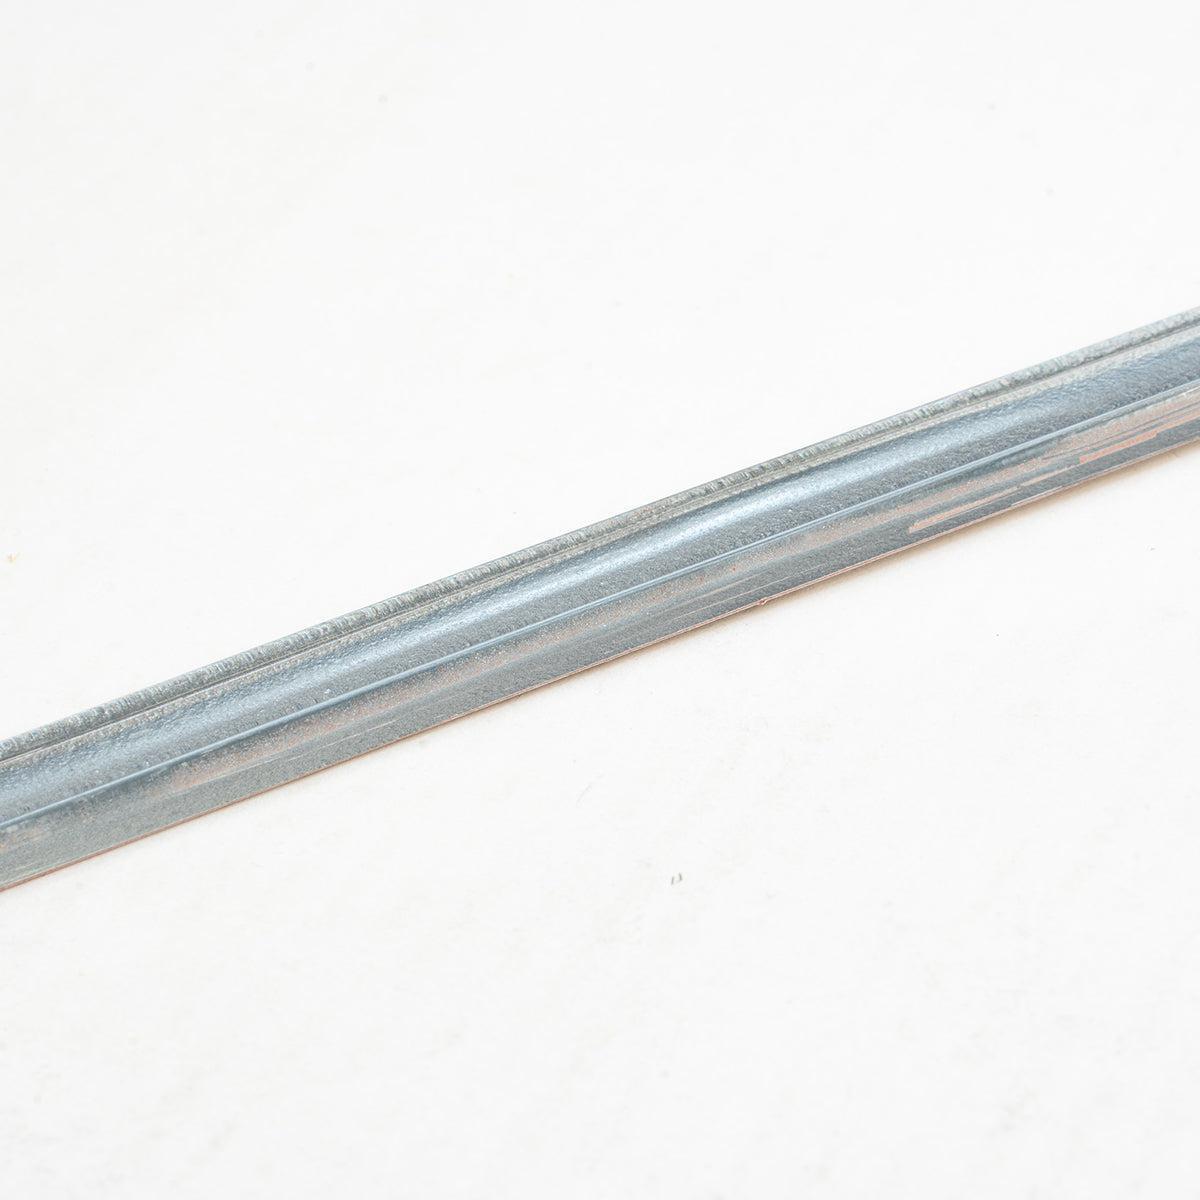 Stardust Pewter Pencil Glass Molding